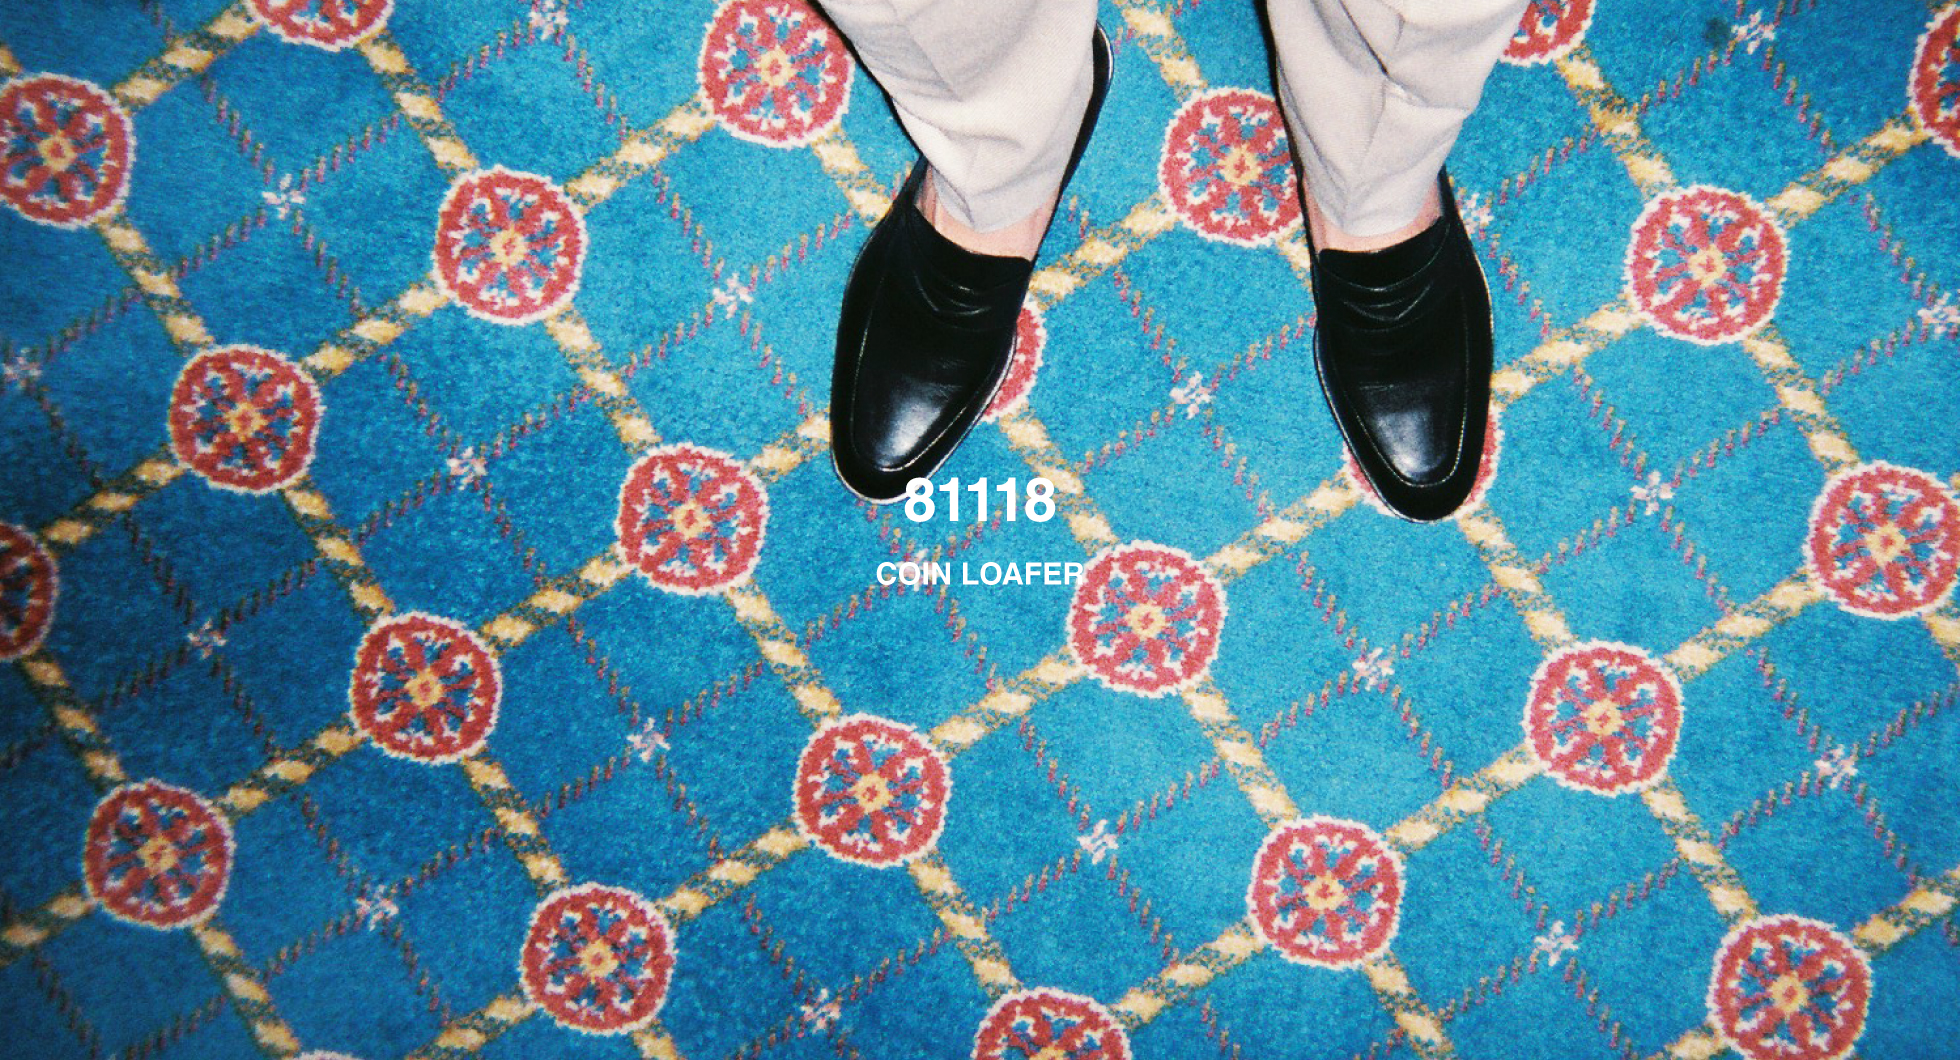 81118 COIN LOAFER